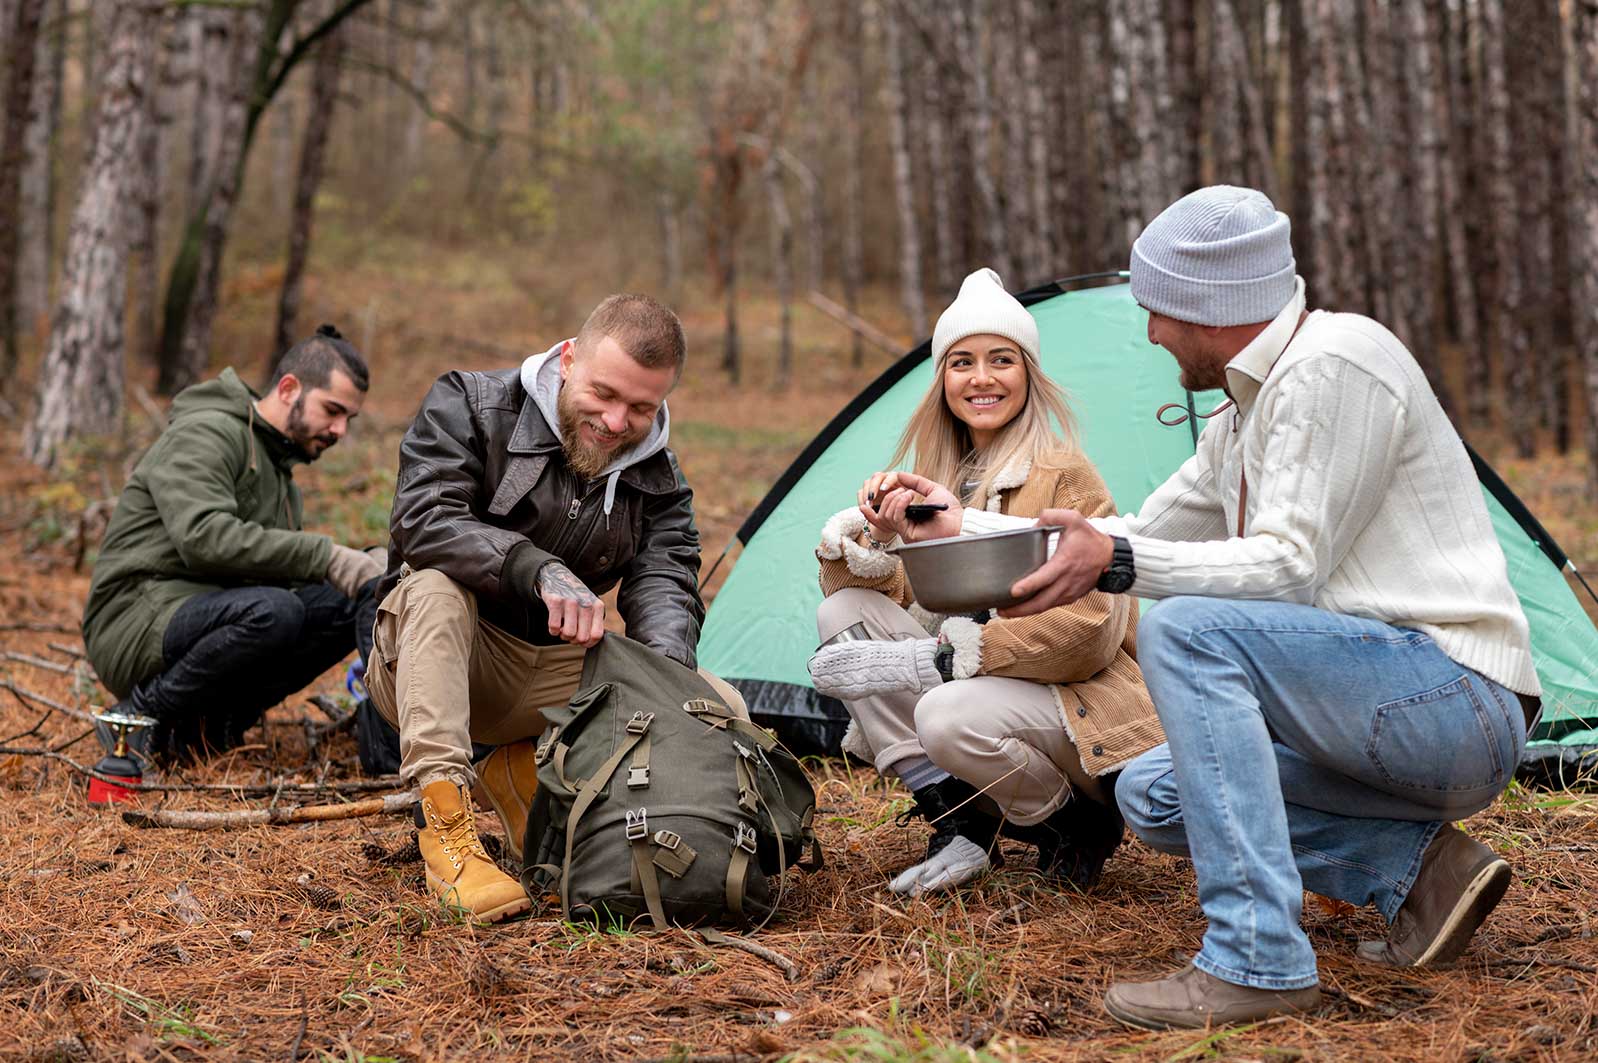 At its core, camping is a means of connecting with nature. It provides an opportunity to appreciate and explore the beauty of the natural world, including forests, lakes, mountains, and various ecosystems. Campers seek a break from the technological and urban environment to embrace the tranquility of the outdoors. #NatureConnection #CampingLife